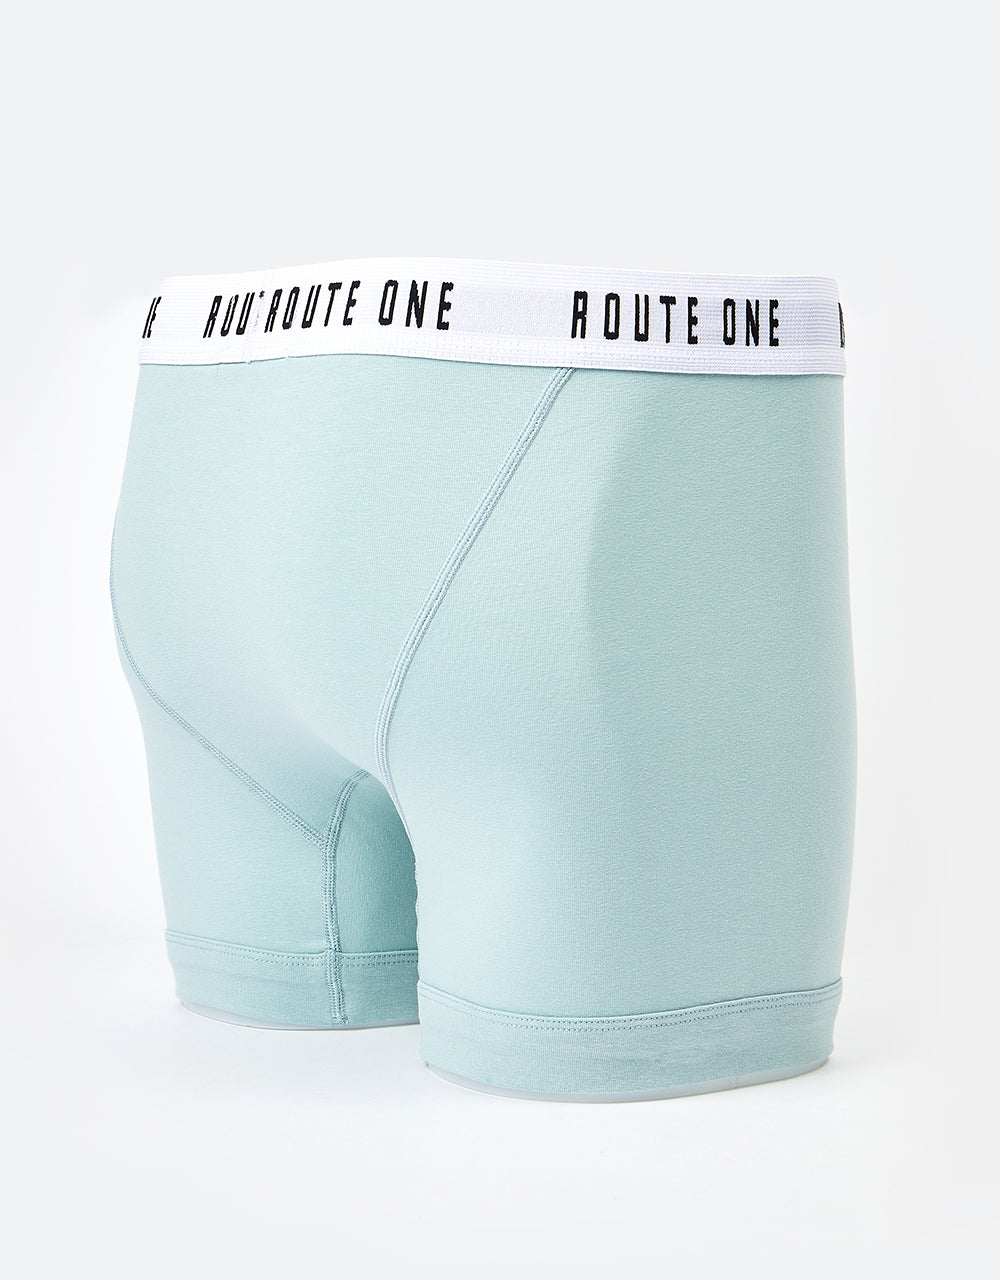 Route One Classic Boxer Shorts 2 Pack - Duck Egg/Stone Blue